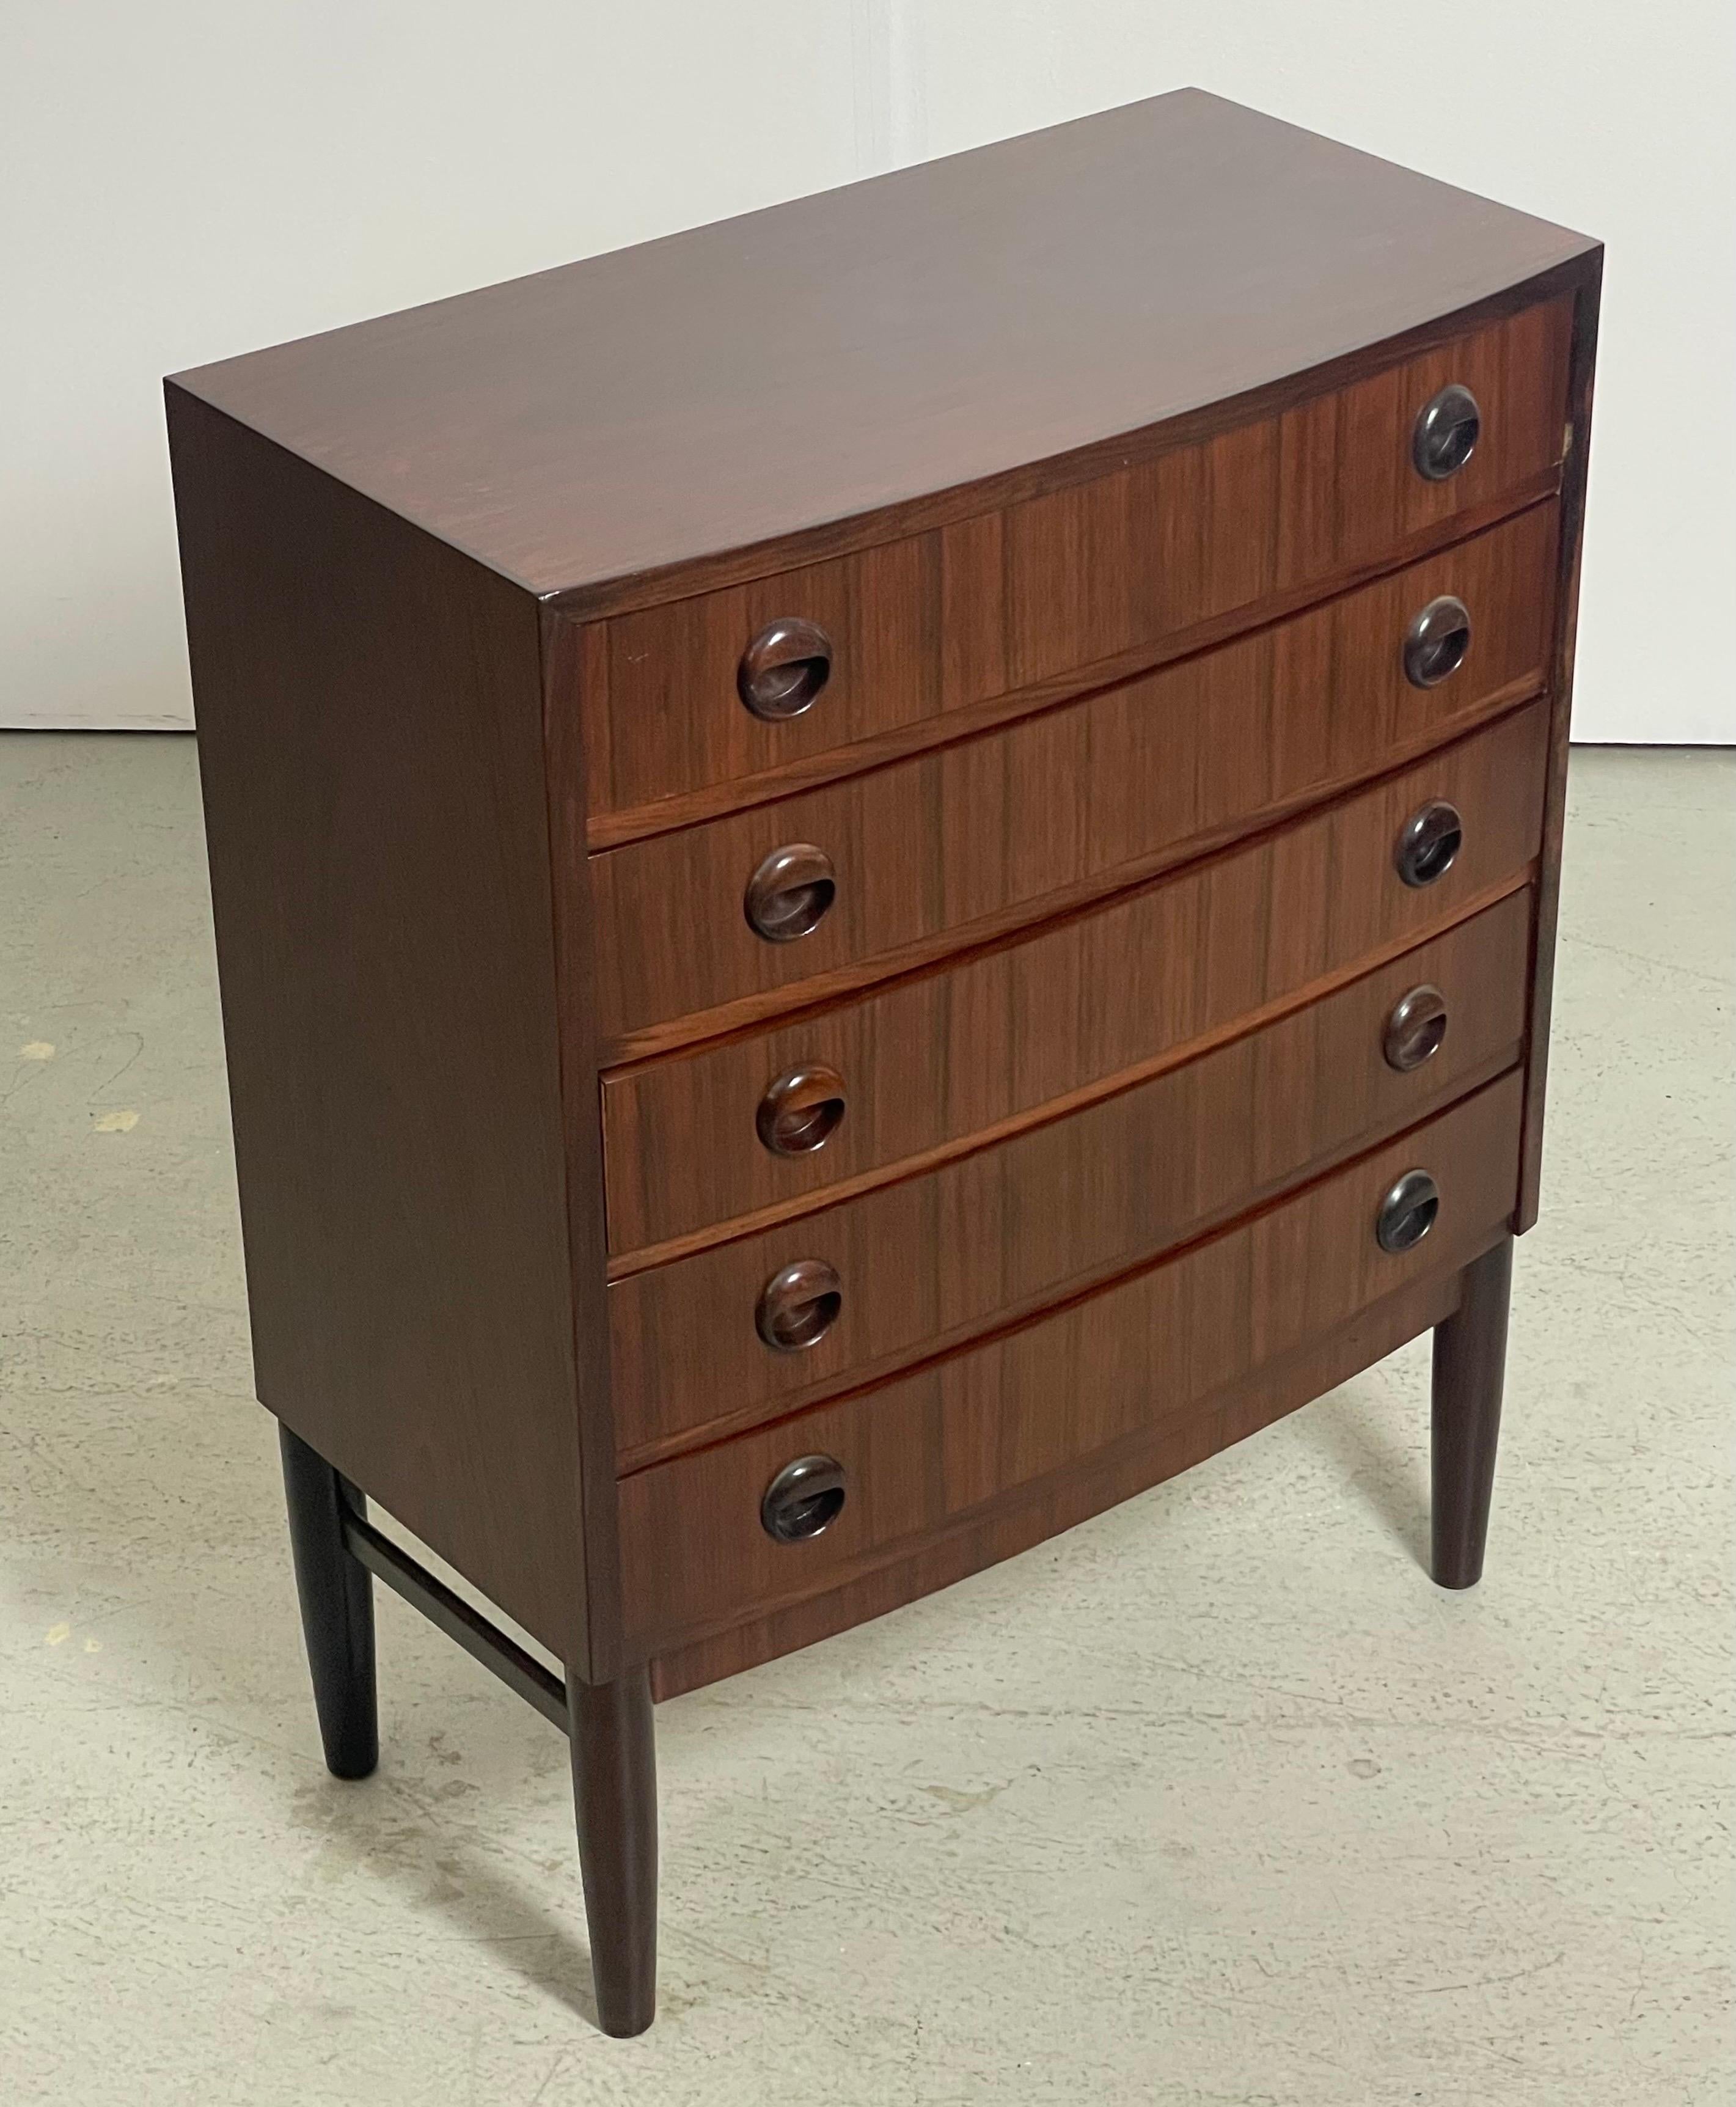 Danish Chest of Drawers in Palisander by Kai Kristiansen 1960s For Sale 7